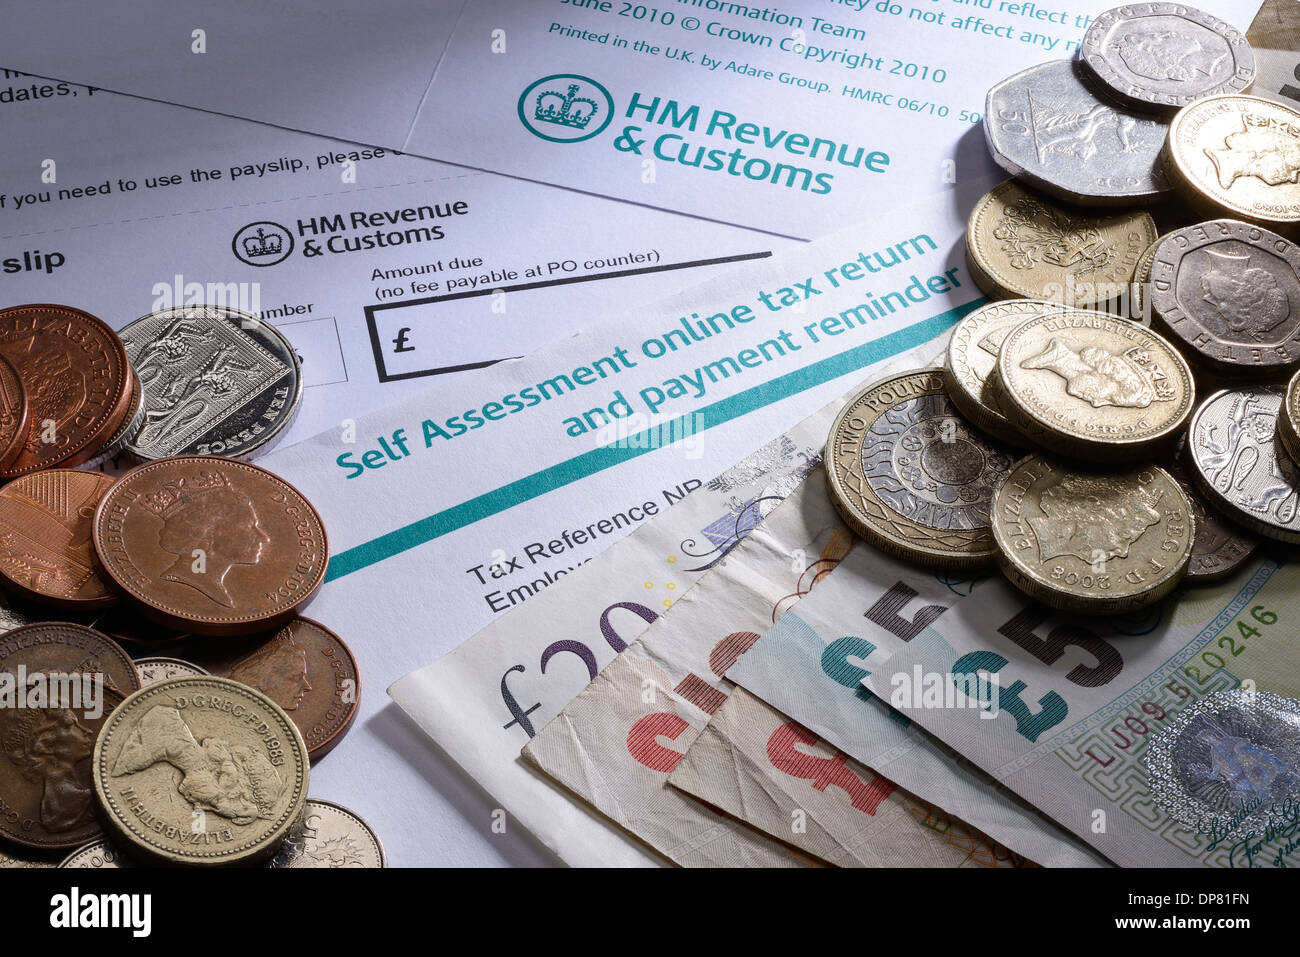 HMRC Self Assessment paperwork with coins and money Stock Photo